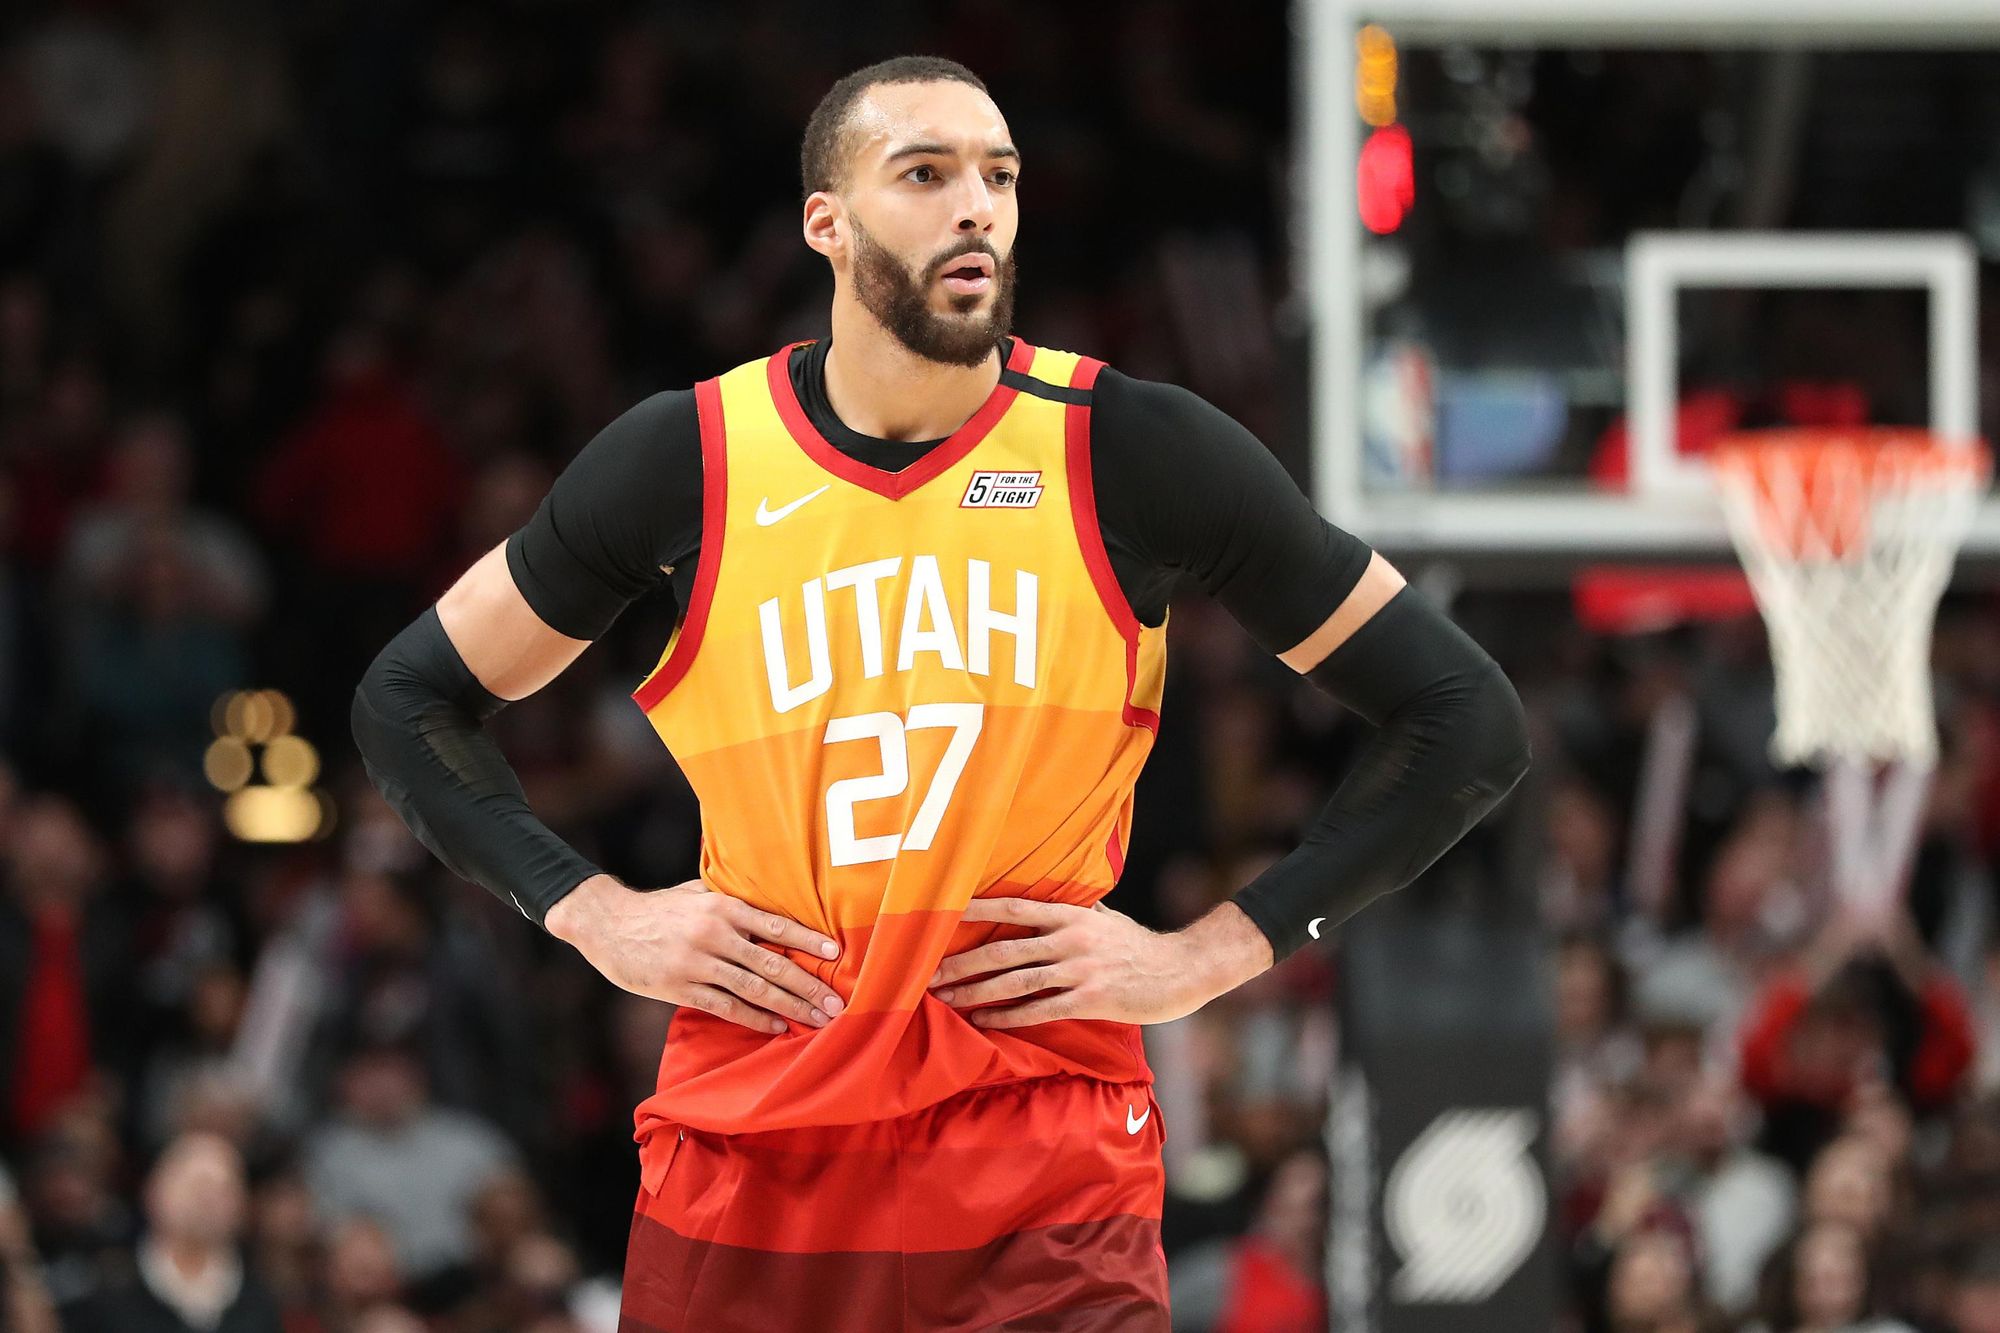 NBA Defensive Player Of The Year Race: Utah Jazz’ Rudy Gobert Could Win Third Straight DPOY Award